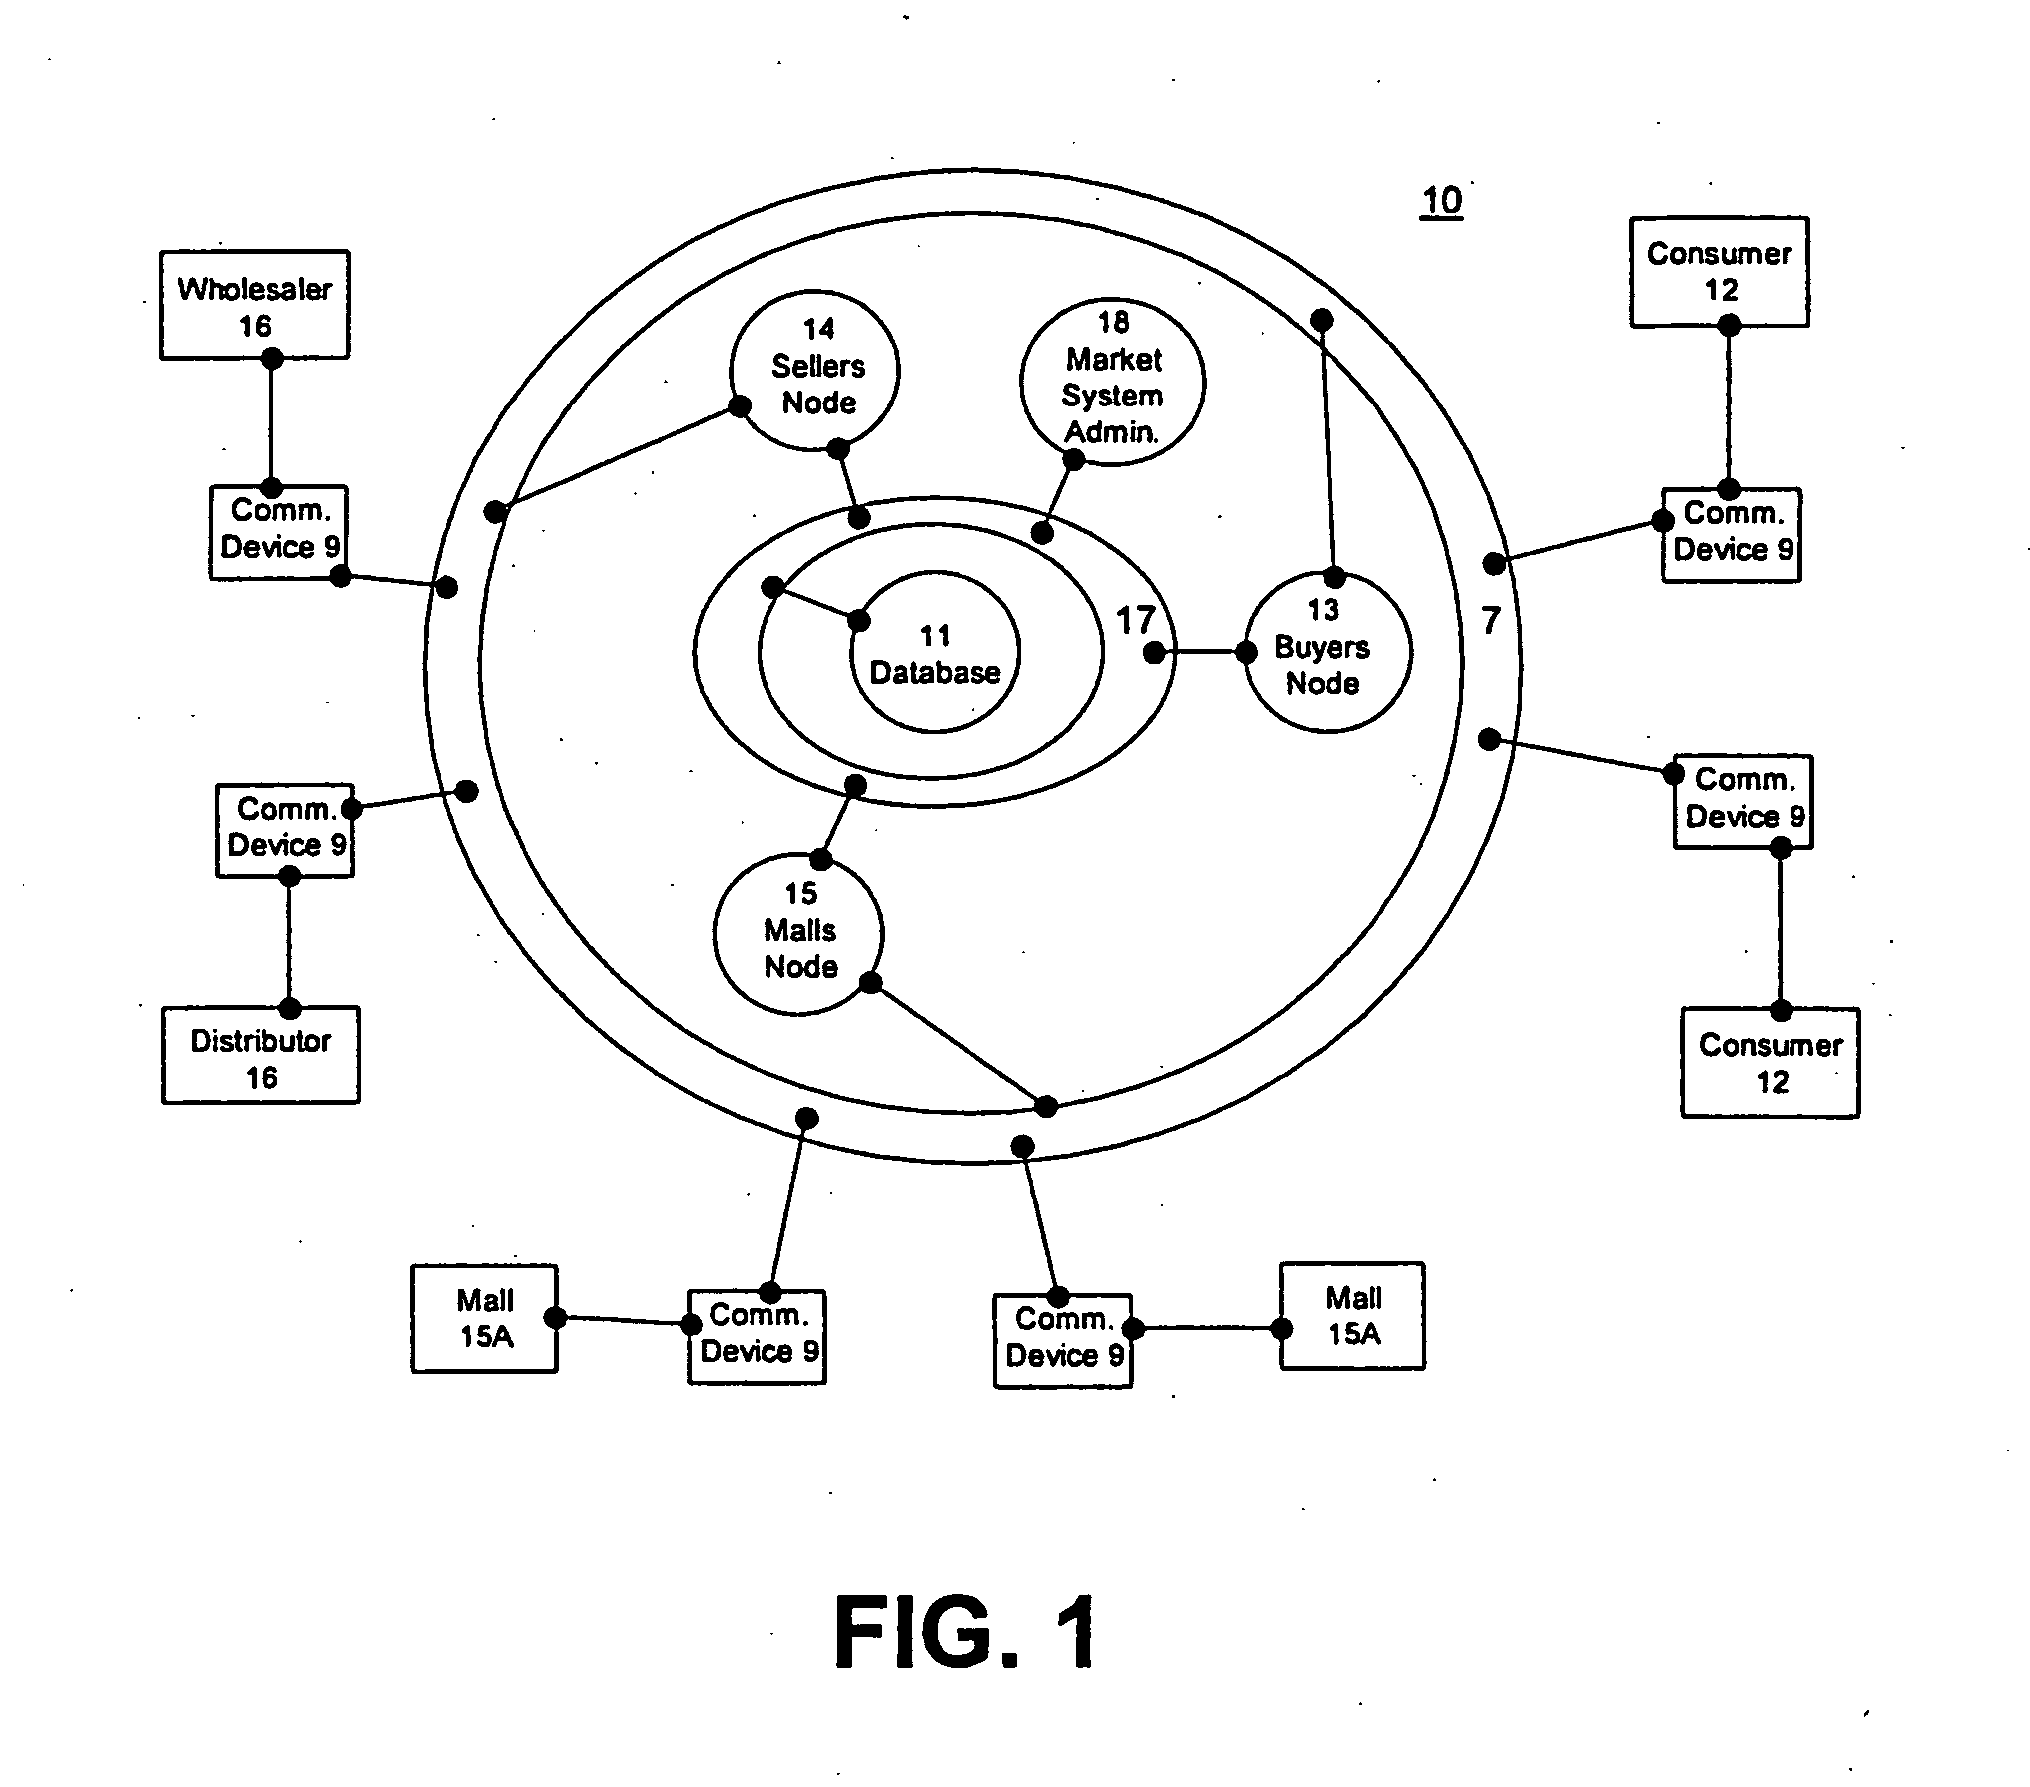 Method and system of an integrated business topography and virtual 3D network portal